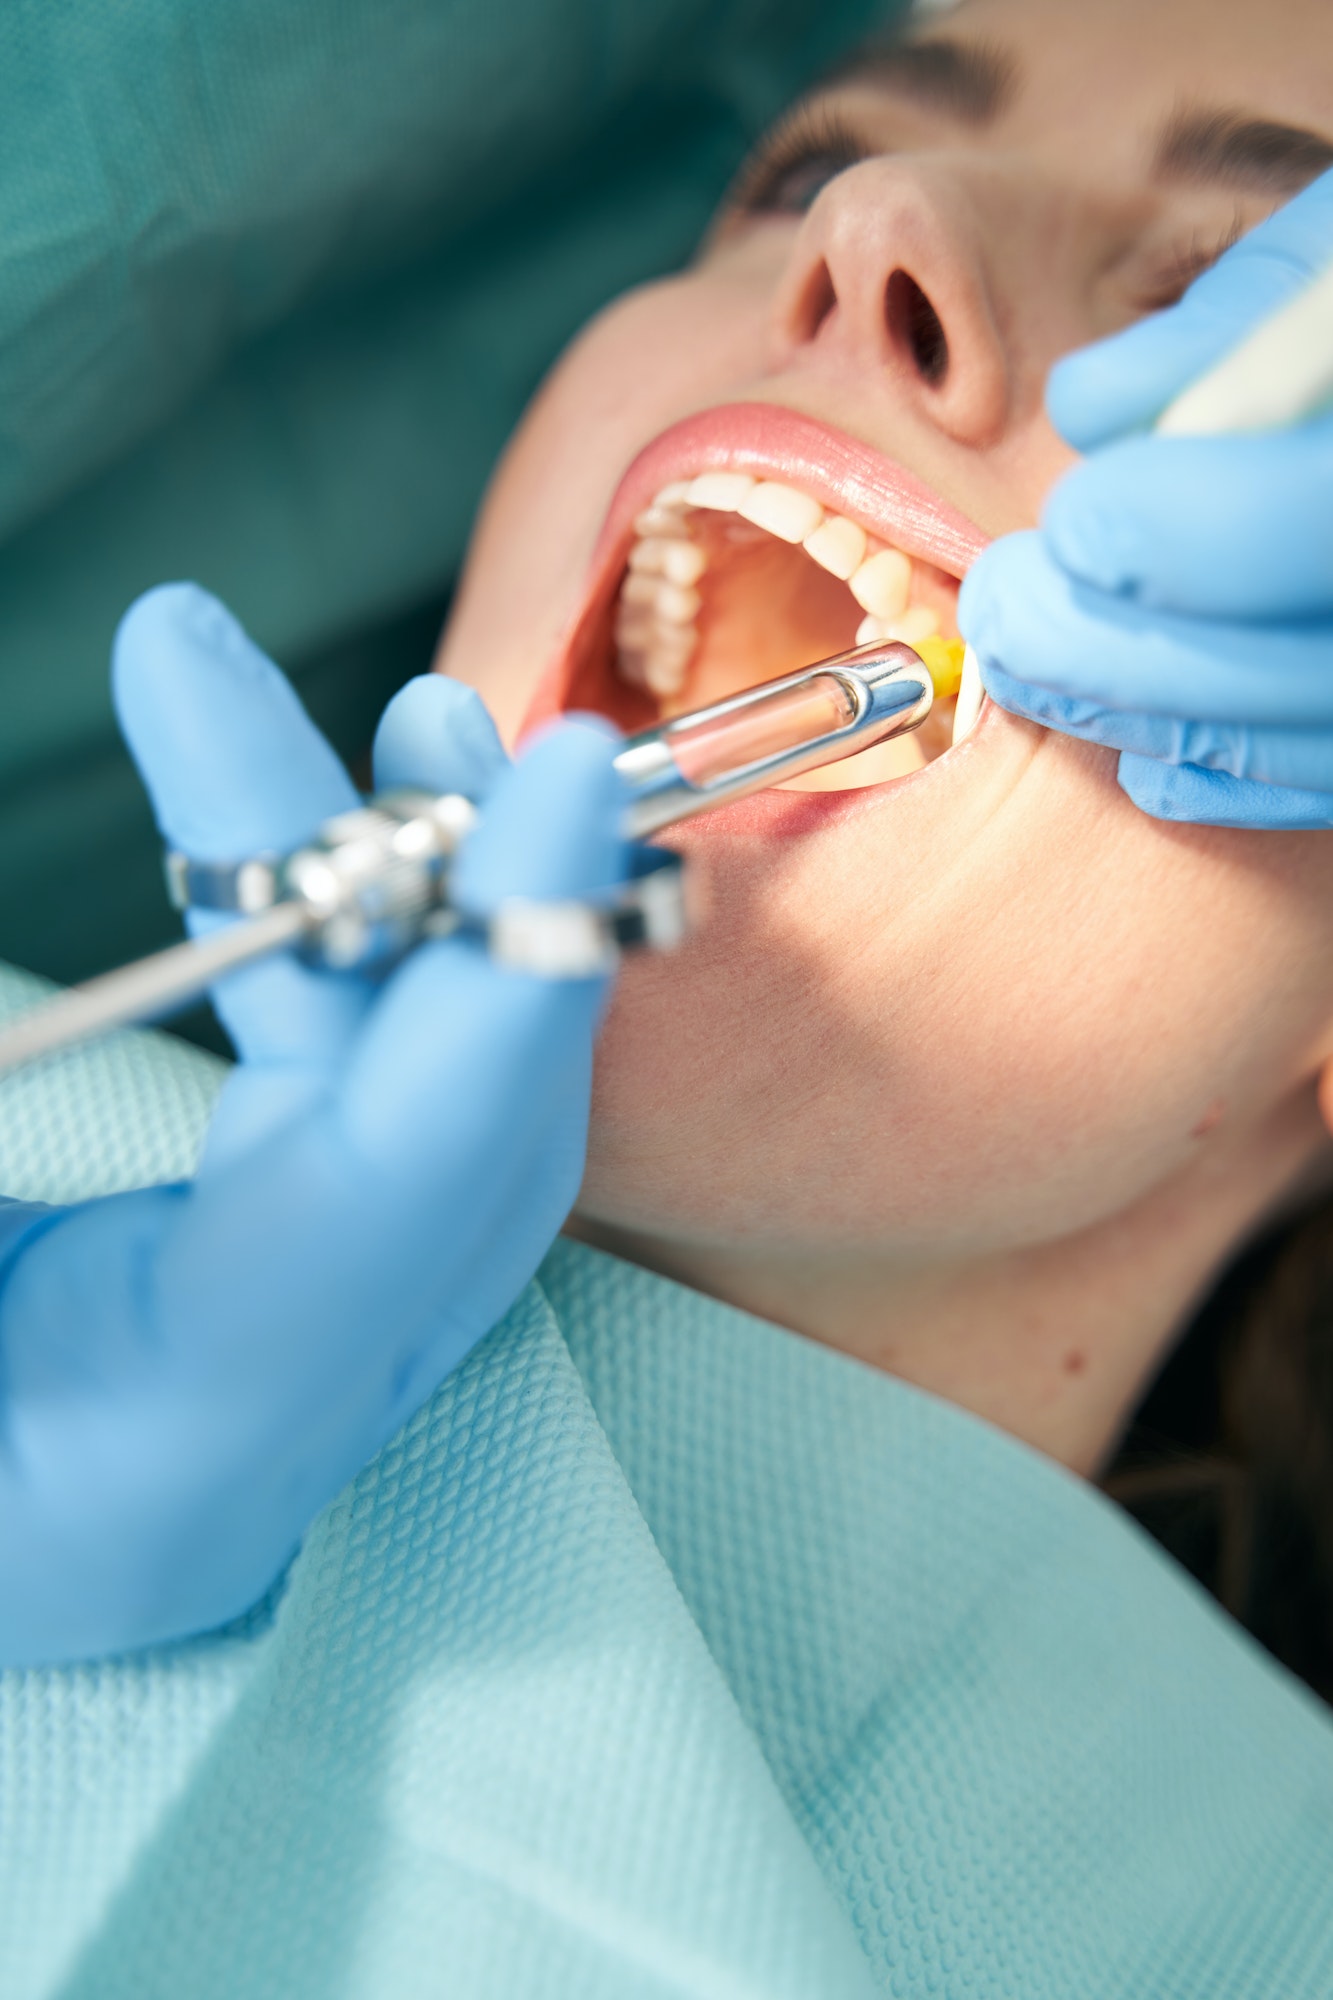 Dentist injecting anesthetic medicine into patient inner cheek